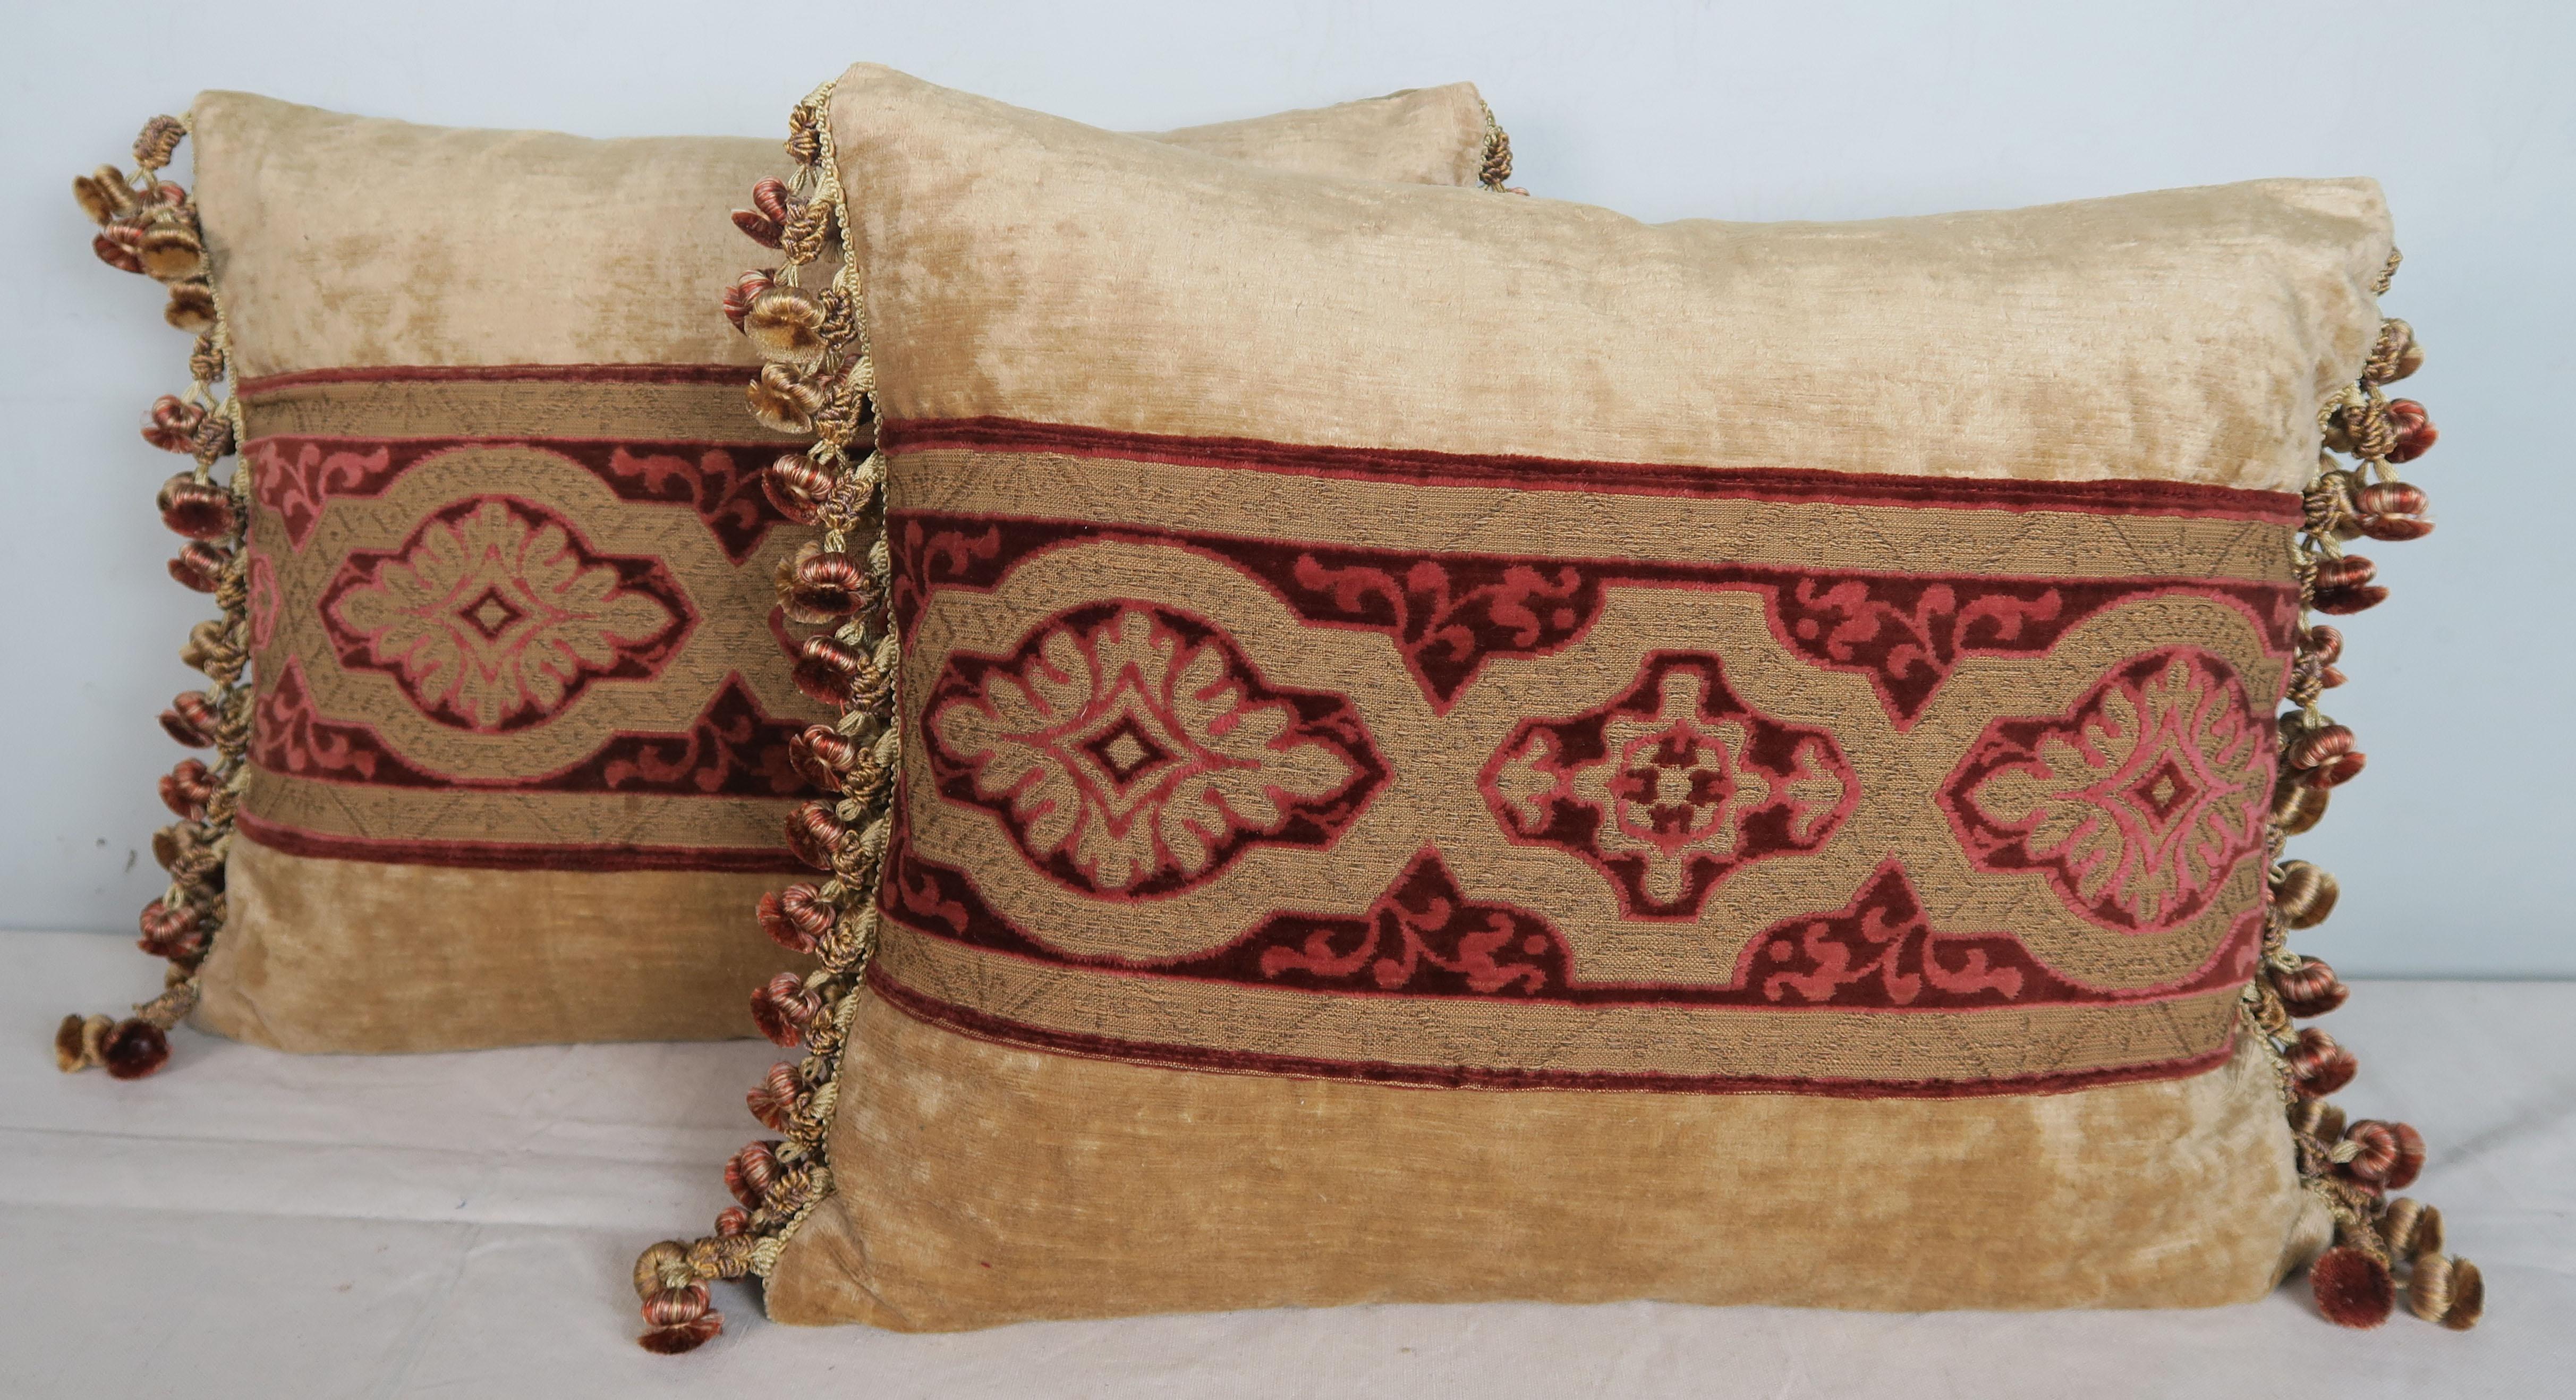 Pair of custom pillows made with vintage cut raspberry colored velvet combined with a flat antique gold metallic design. The vintage textile runner is flanked with soft cream colored linen velvet fronts and golden silk backs. The tassel trim down